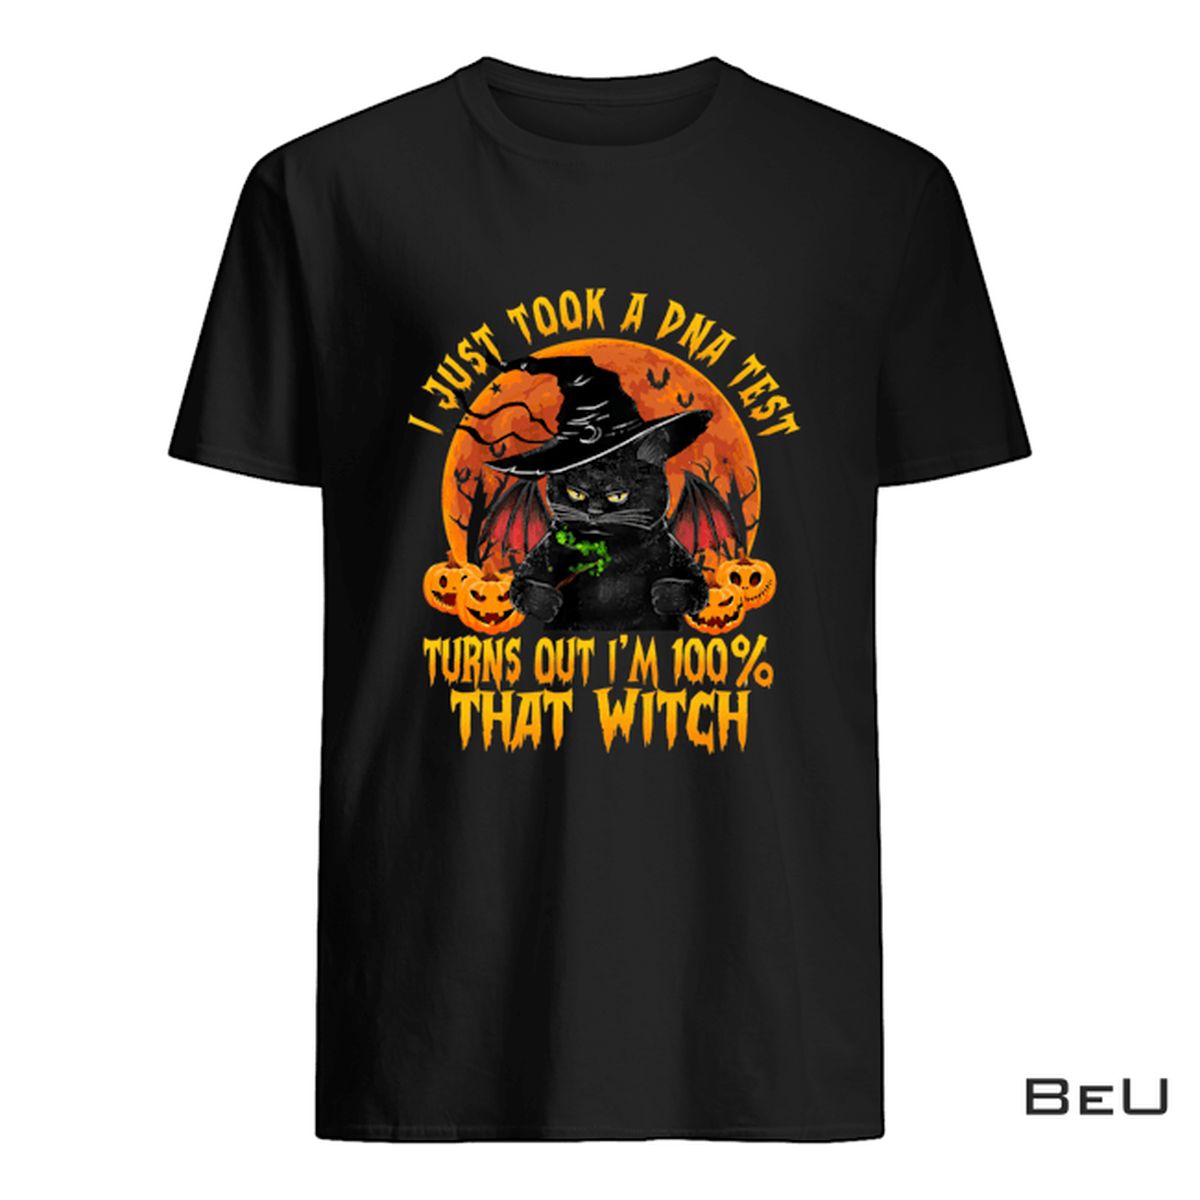 Cat I Just Took A Dna Test Turns Out I'm 100% That Witch Shirt